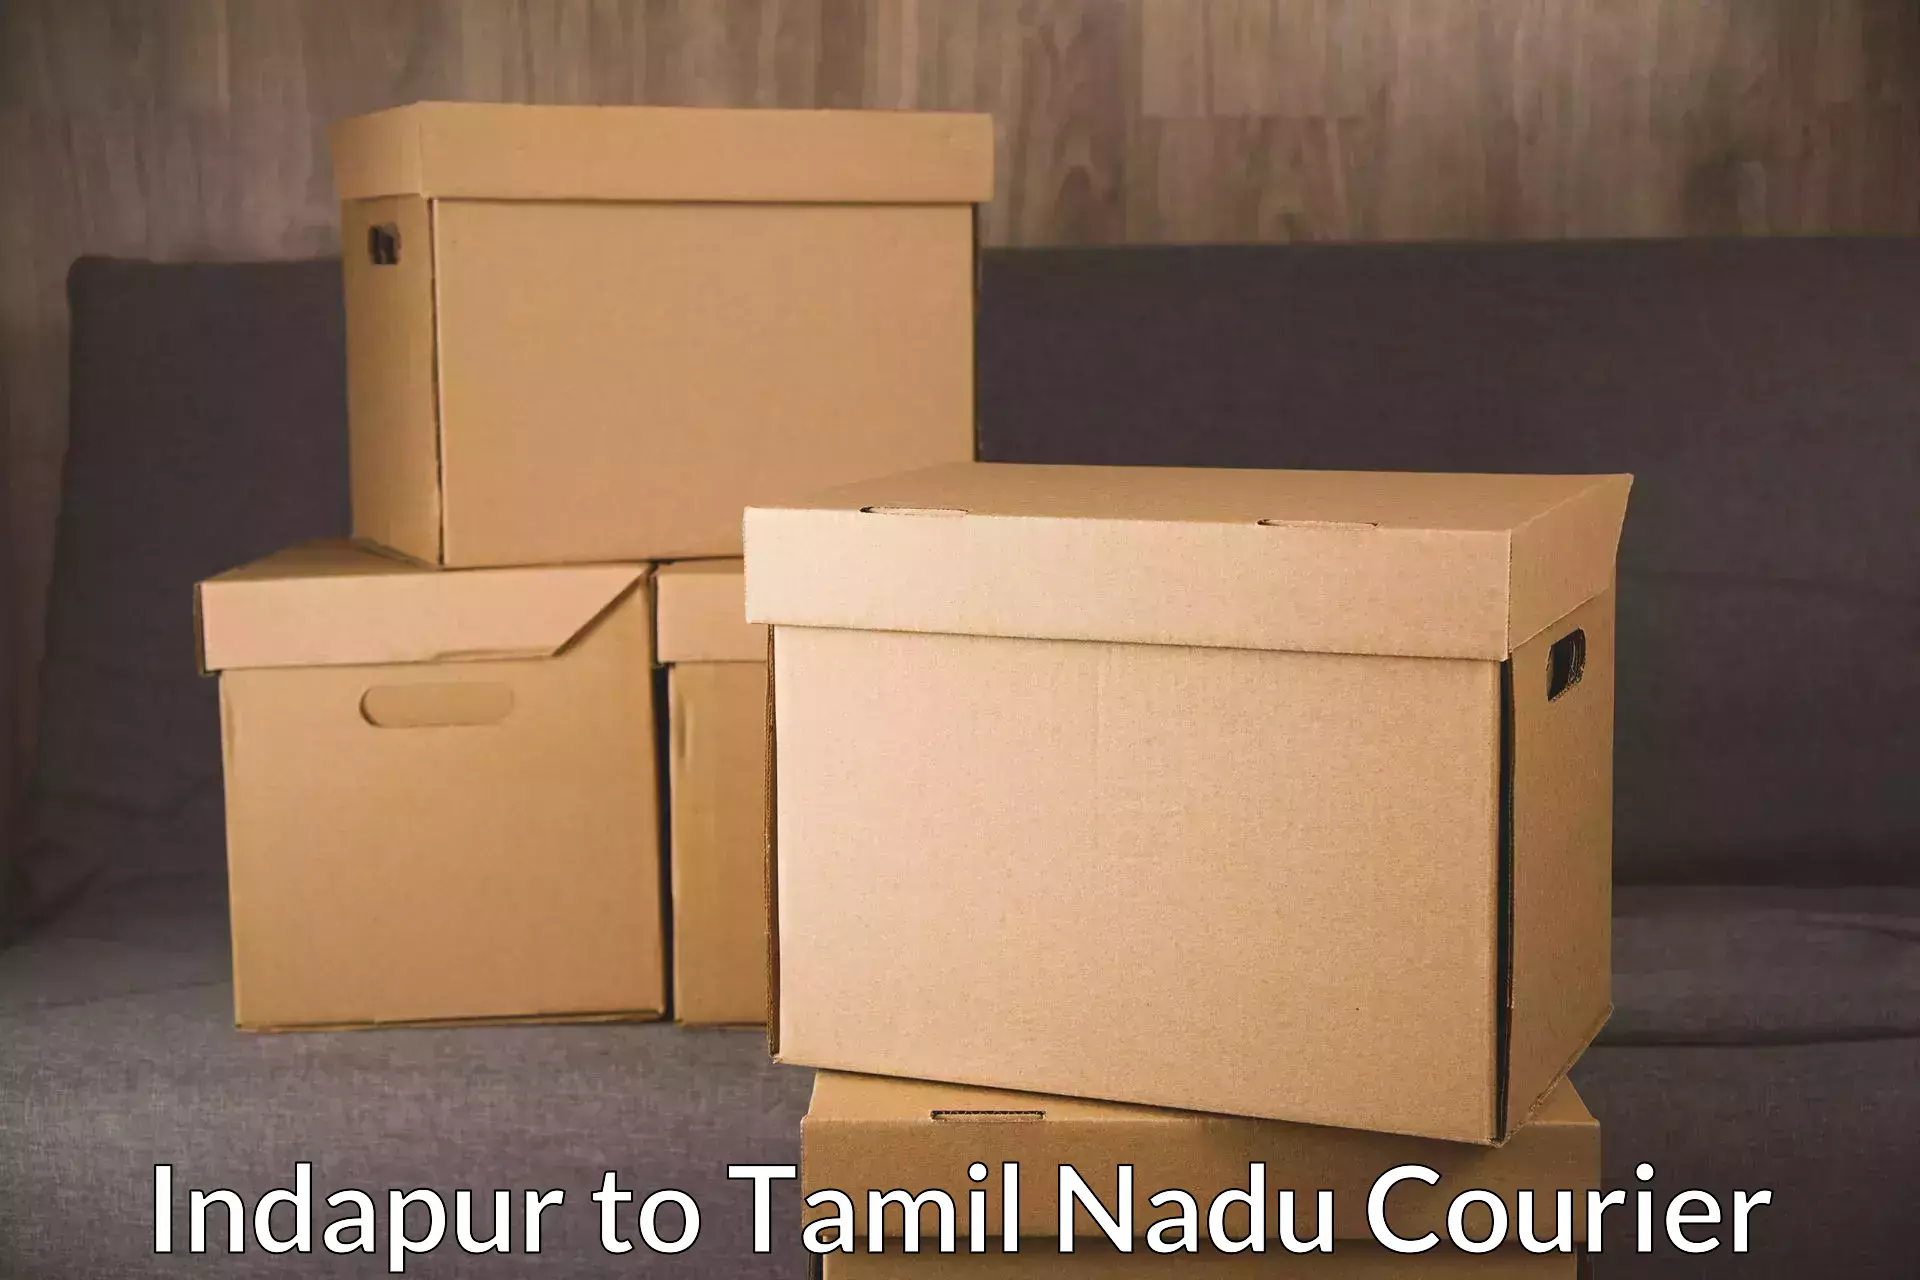 Discounted shipping Indapur to Coimbatore